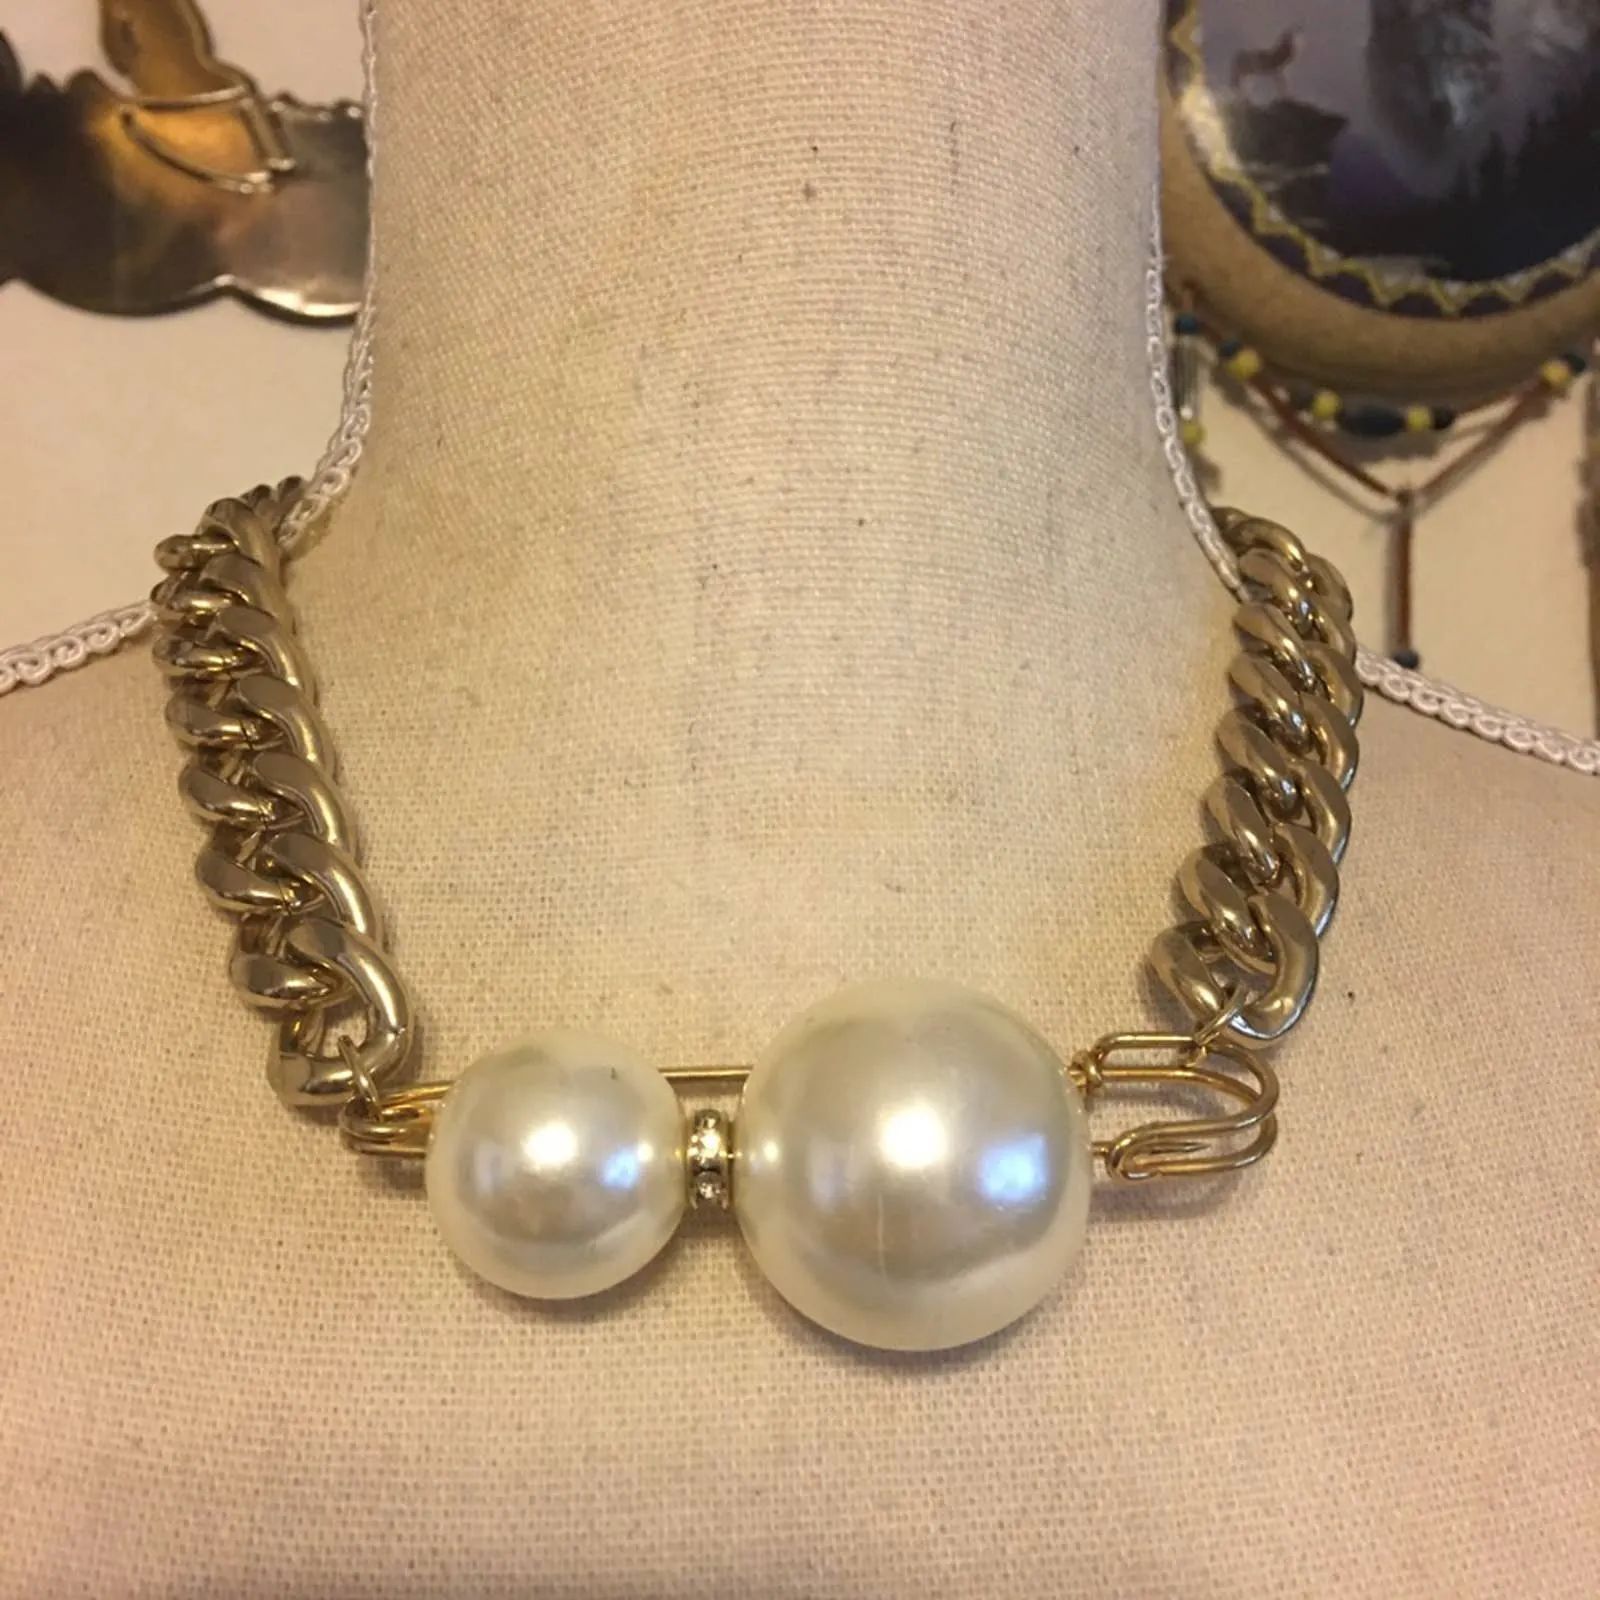 Jewelry Bold chunky gold chain pearl accent necklace | Grailed | Grailed